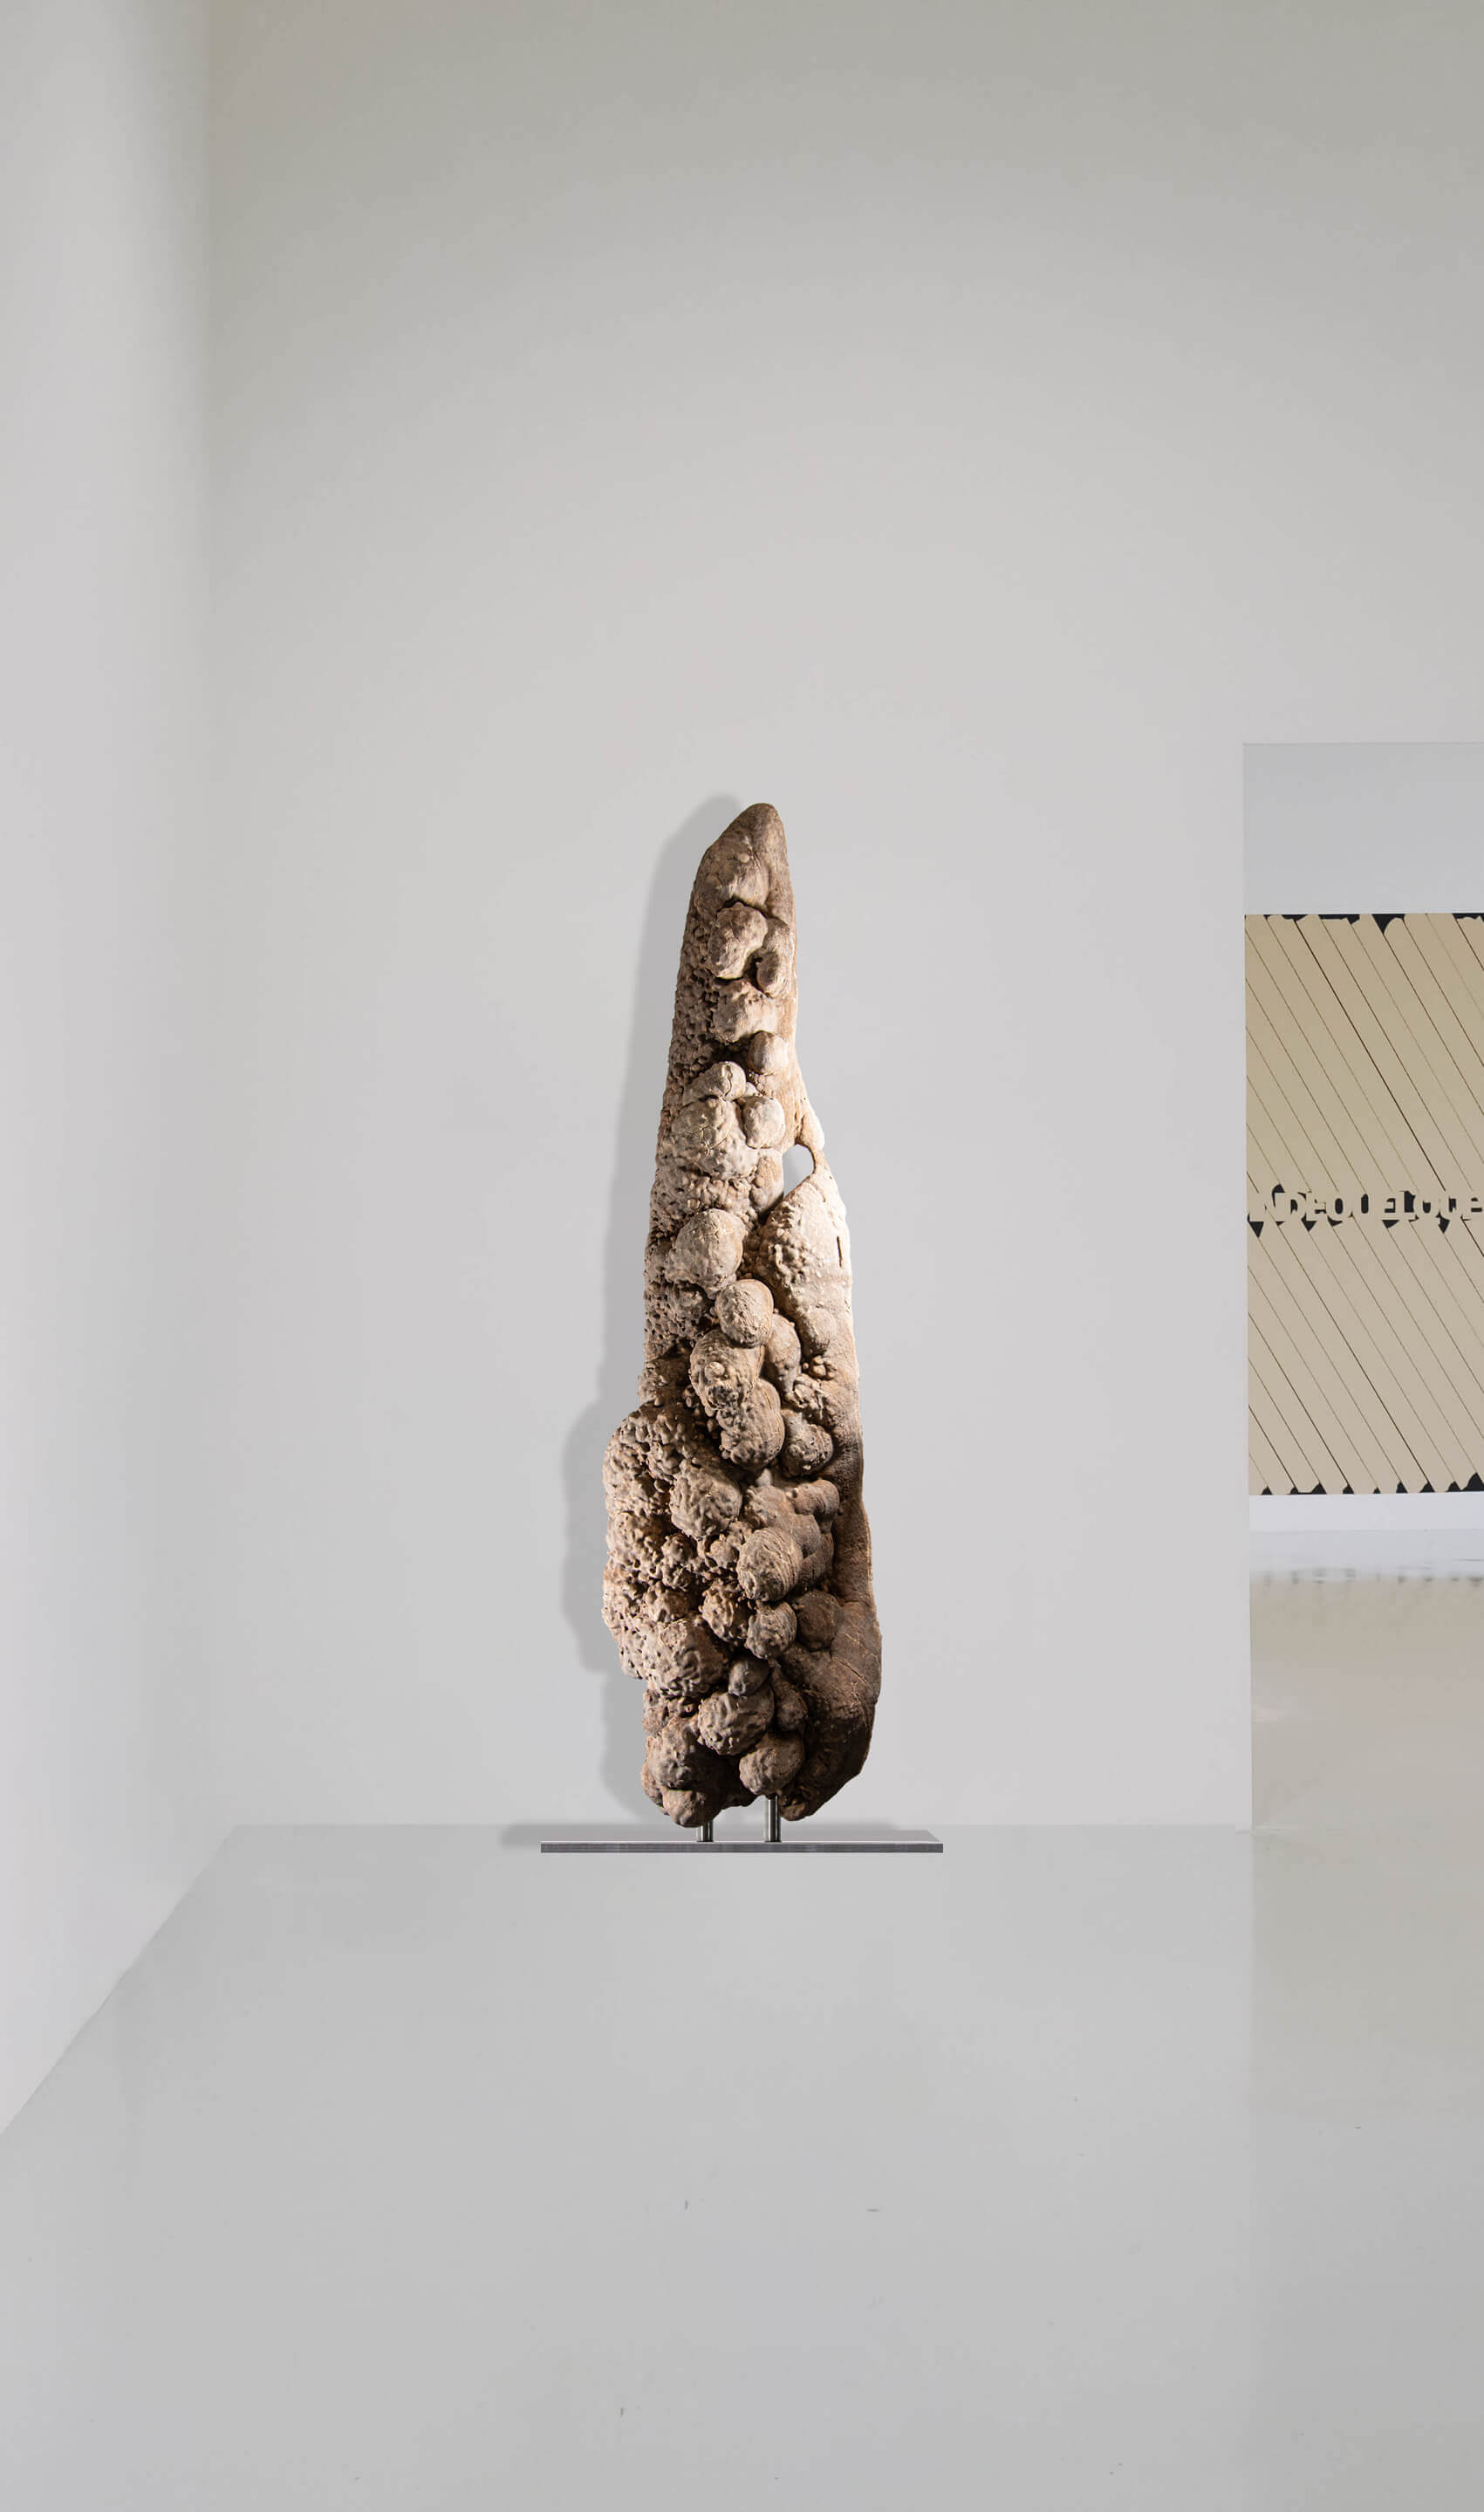 A closer look at a large desert rose on a stainless steel stand in an art gallery